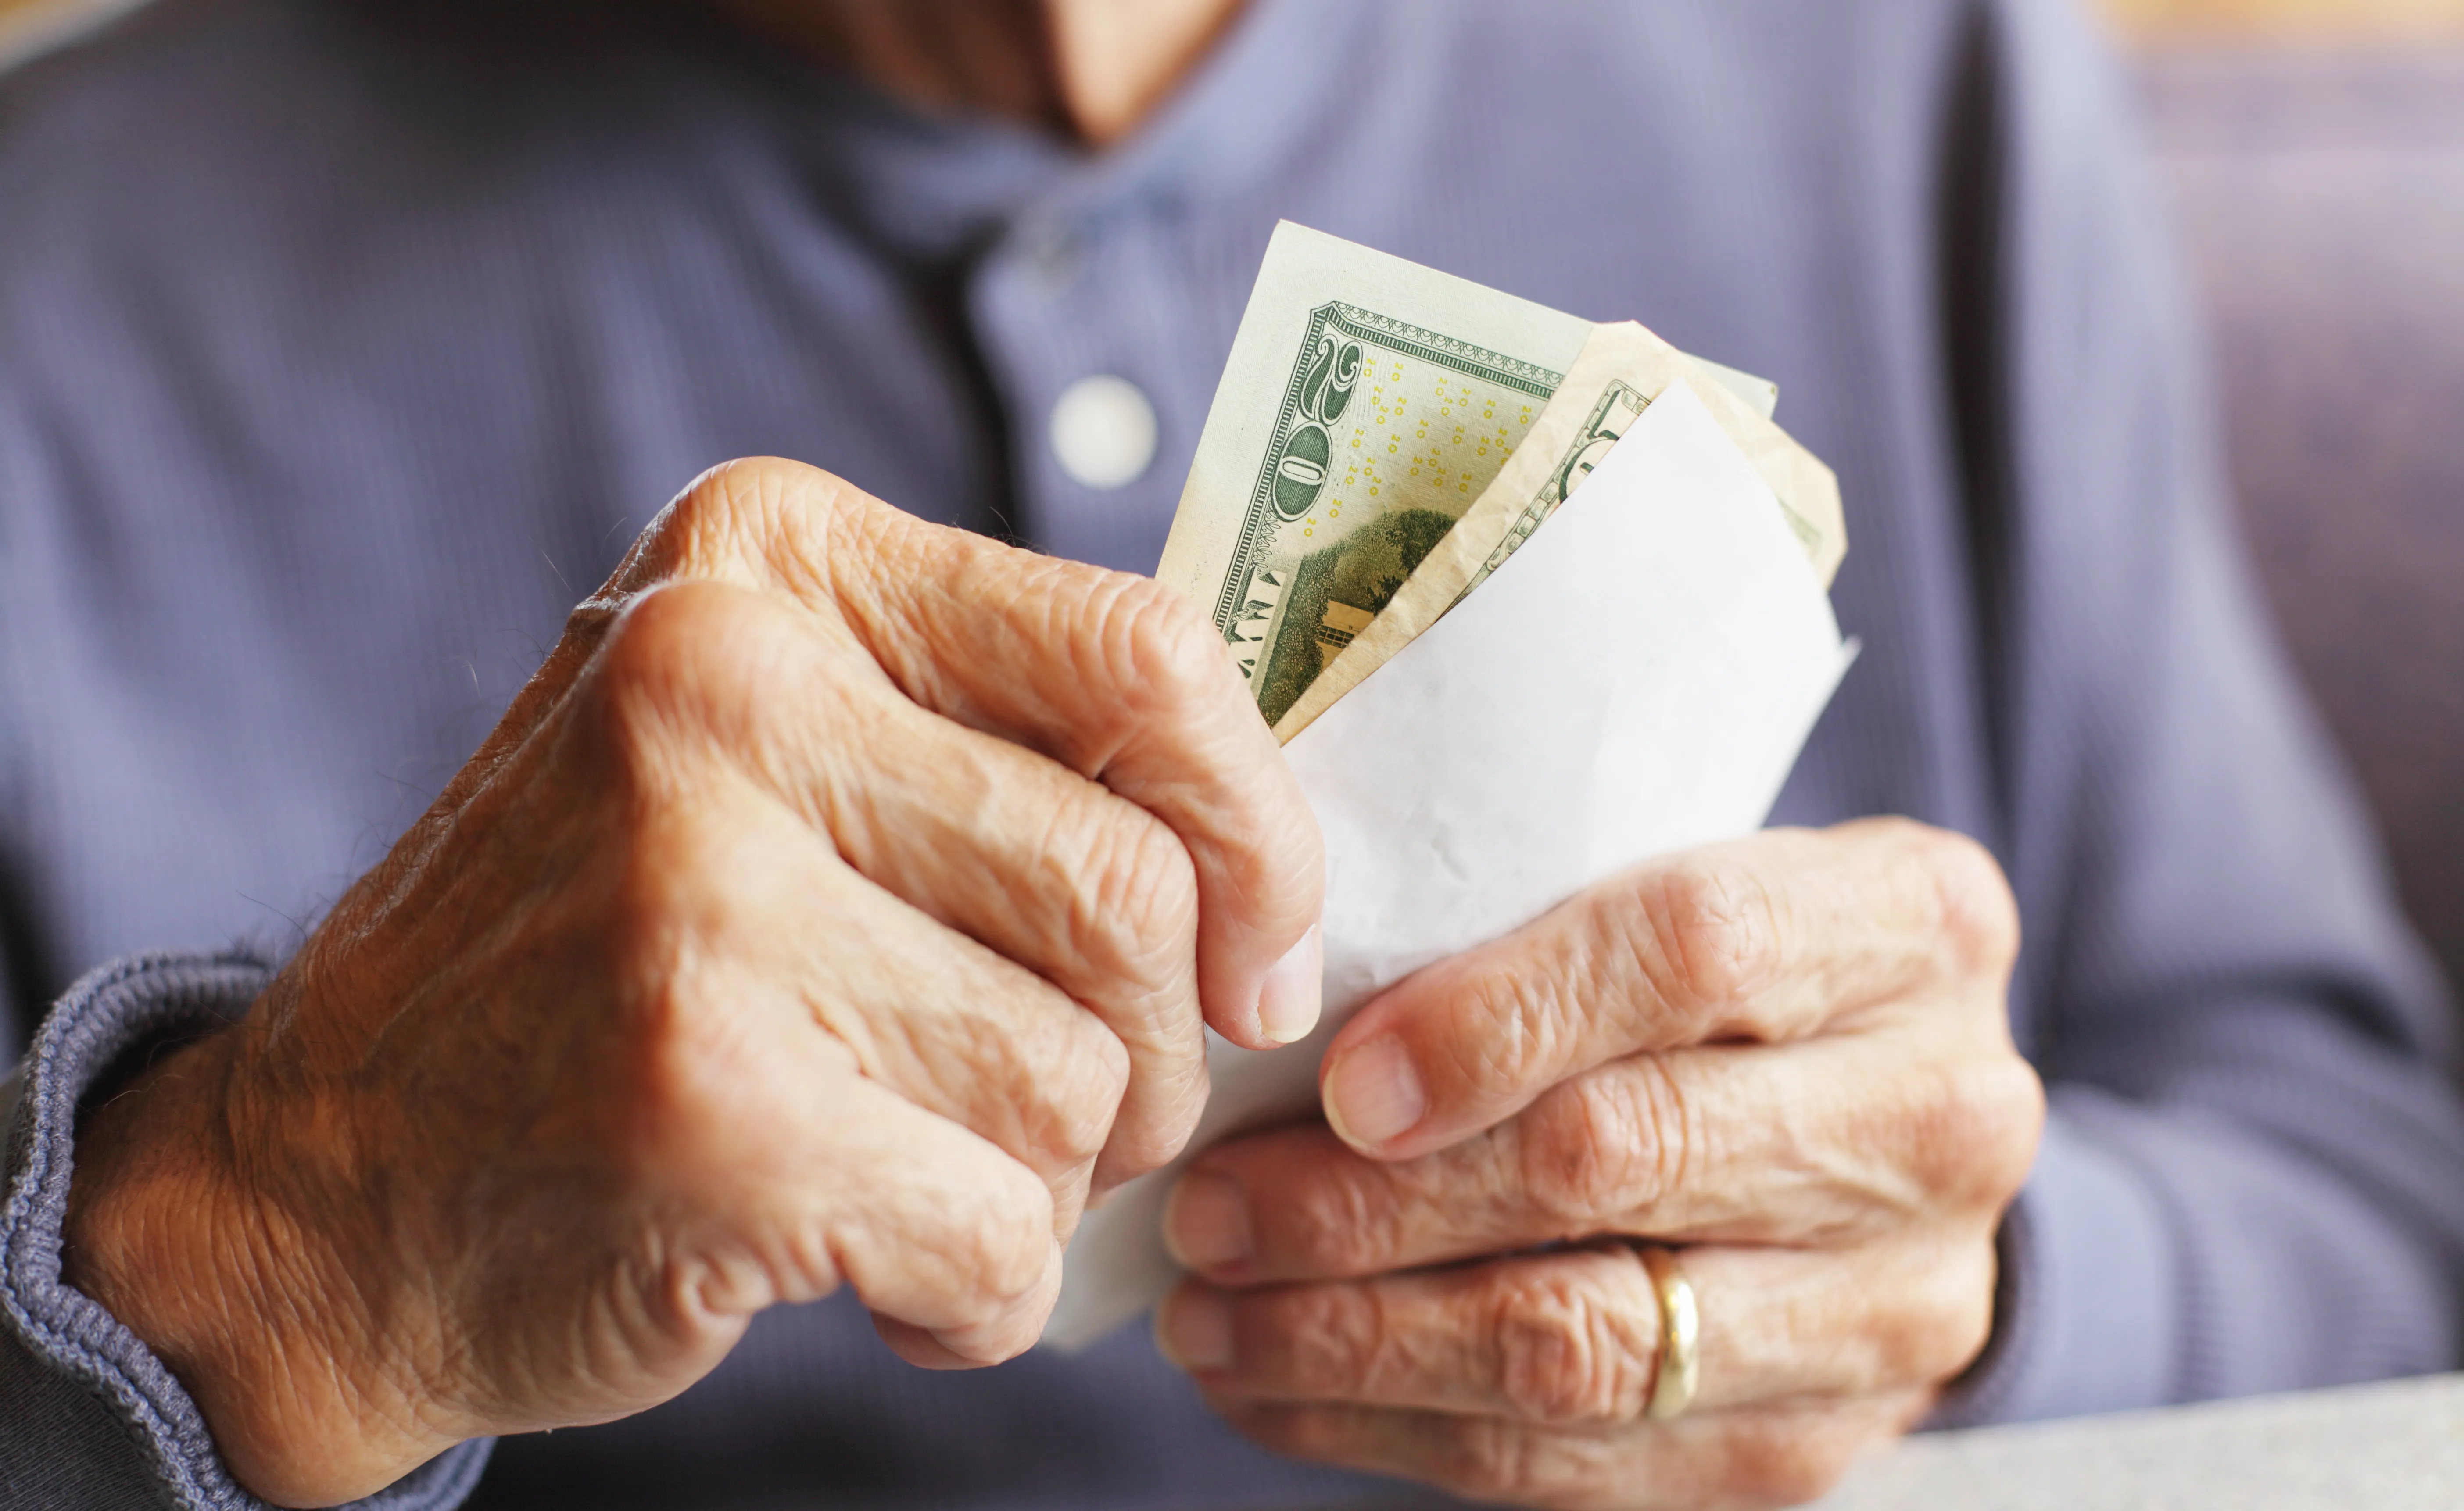 Attention, Old People: Stop Giving Cash to the Youths. They Hate It